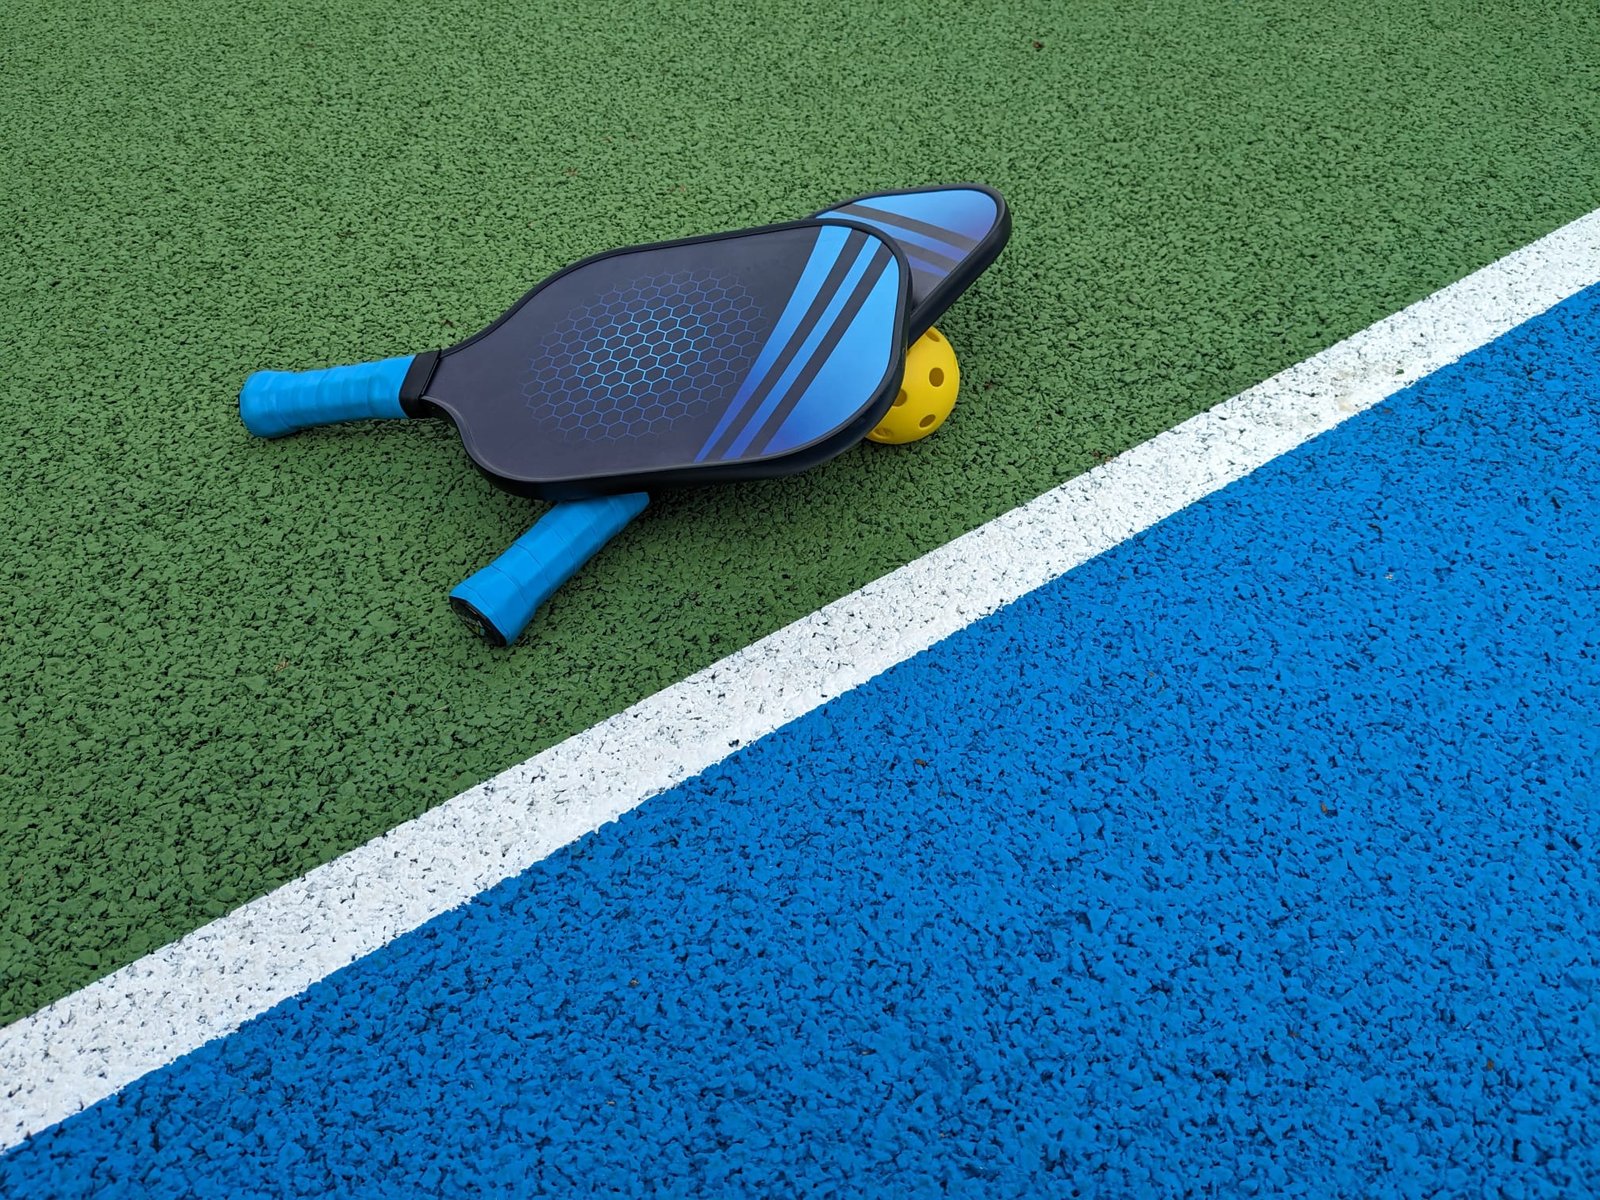 An artistic shot of two paddles balancing on a ball on a pickleball court in North London